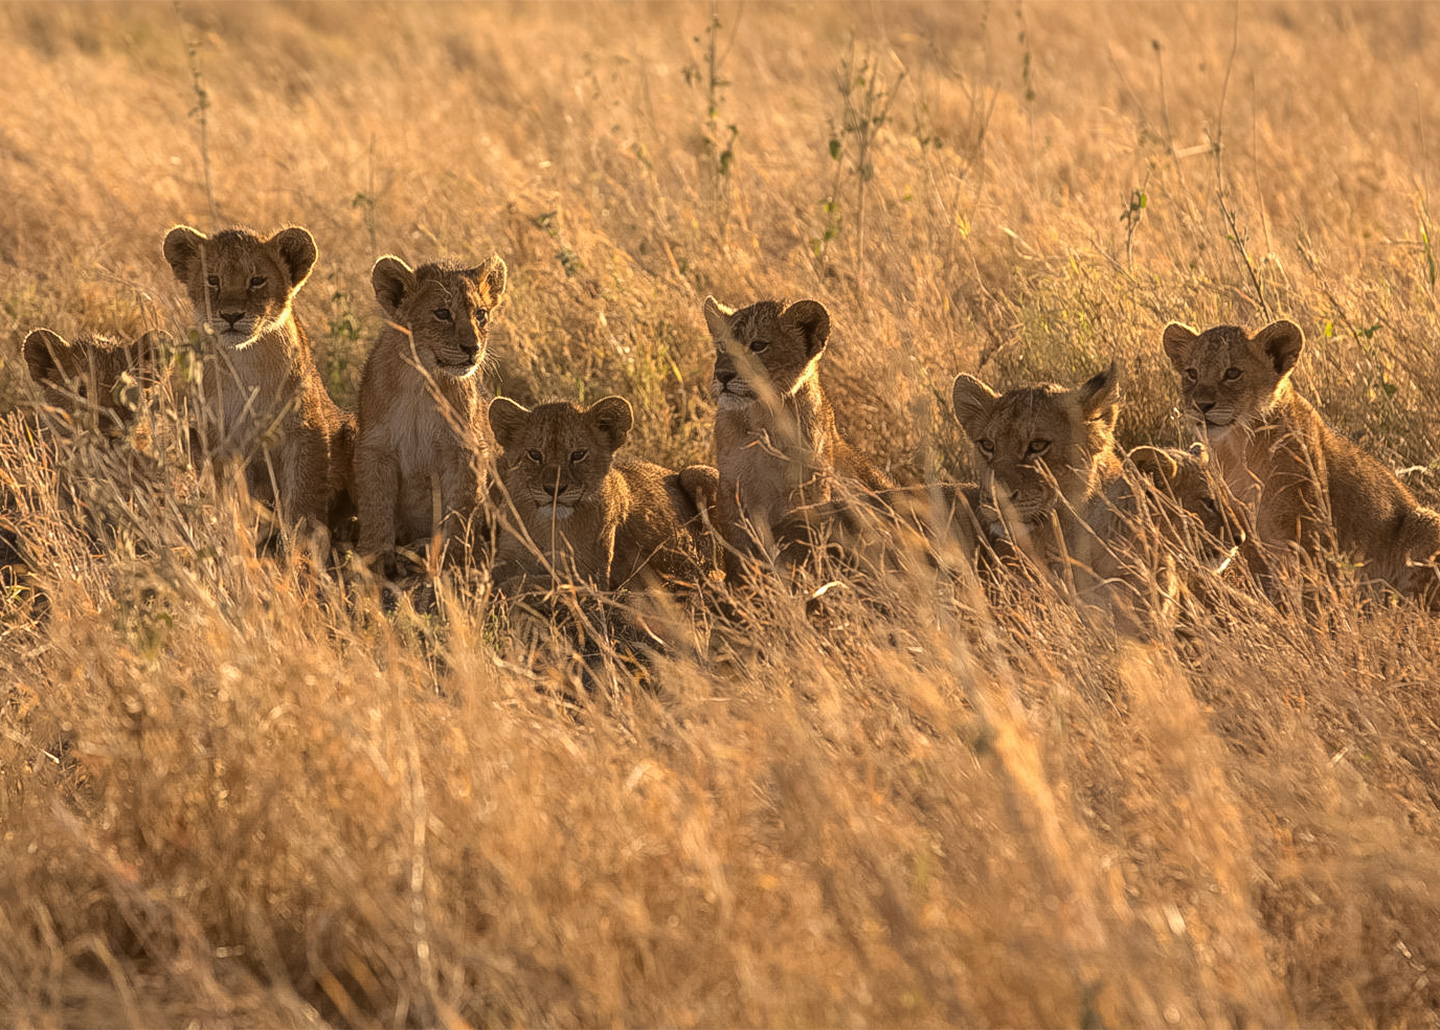 Group of lion cubs